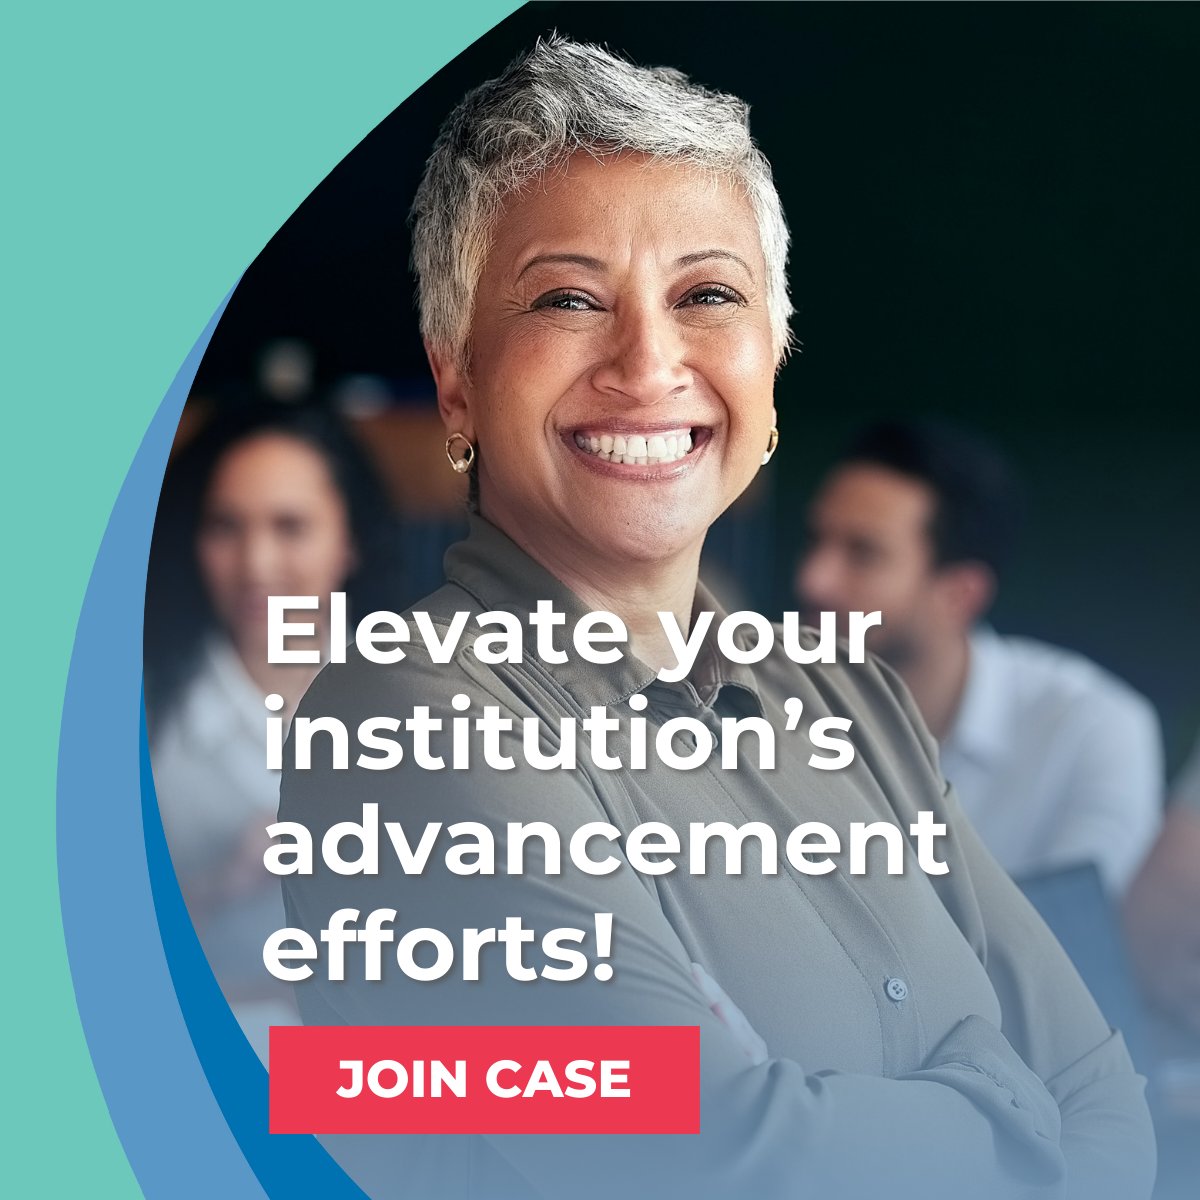 Join us as a CASE member and unlock: 🔑Professional resources addressing your specific goals 🔑Access to industry experts via conferences, webinars, and other networking opportunities 🔑A community of caring professionals who learn together hubs.ly/Q027fNnG0